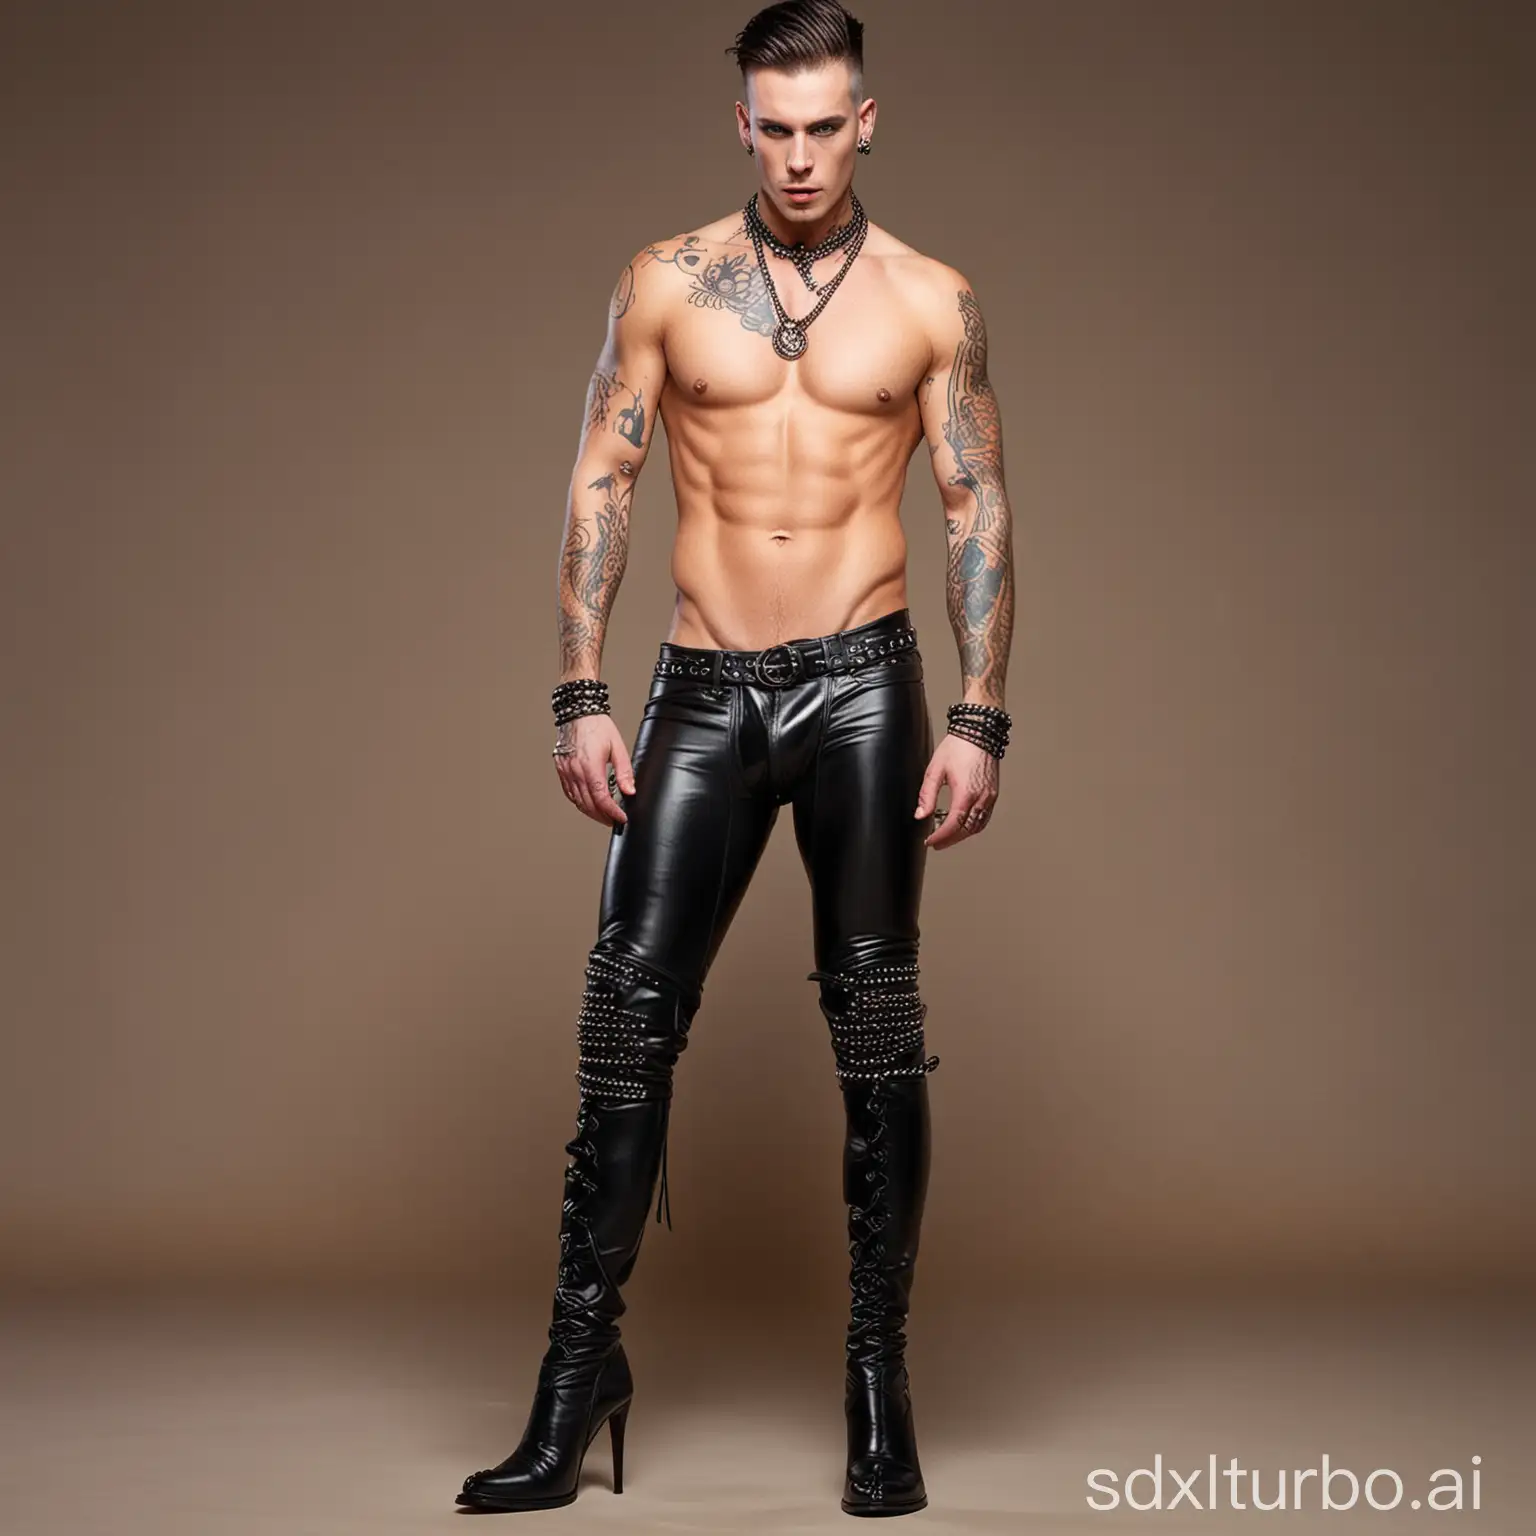 Bold-Fashion-Statement-Naked-Man-in-High-Heel-Overknee-Boots-with-Extreme-Piercings